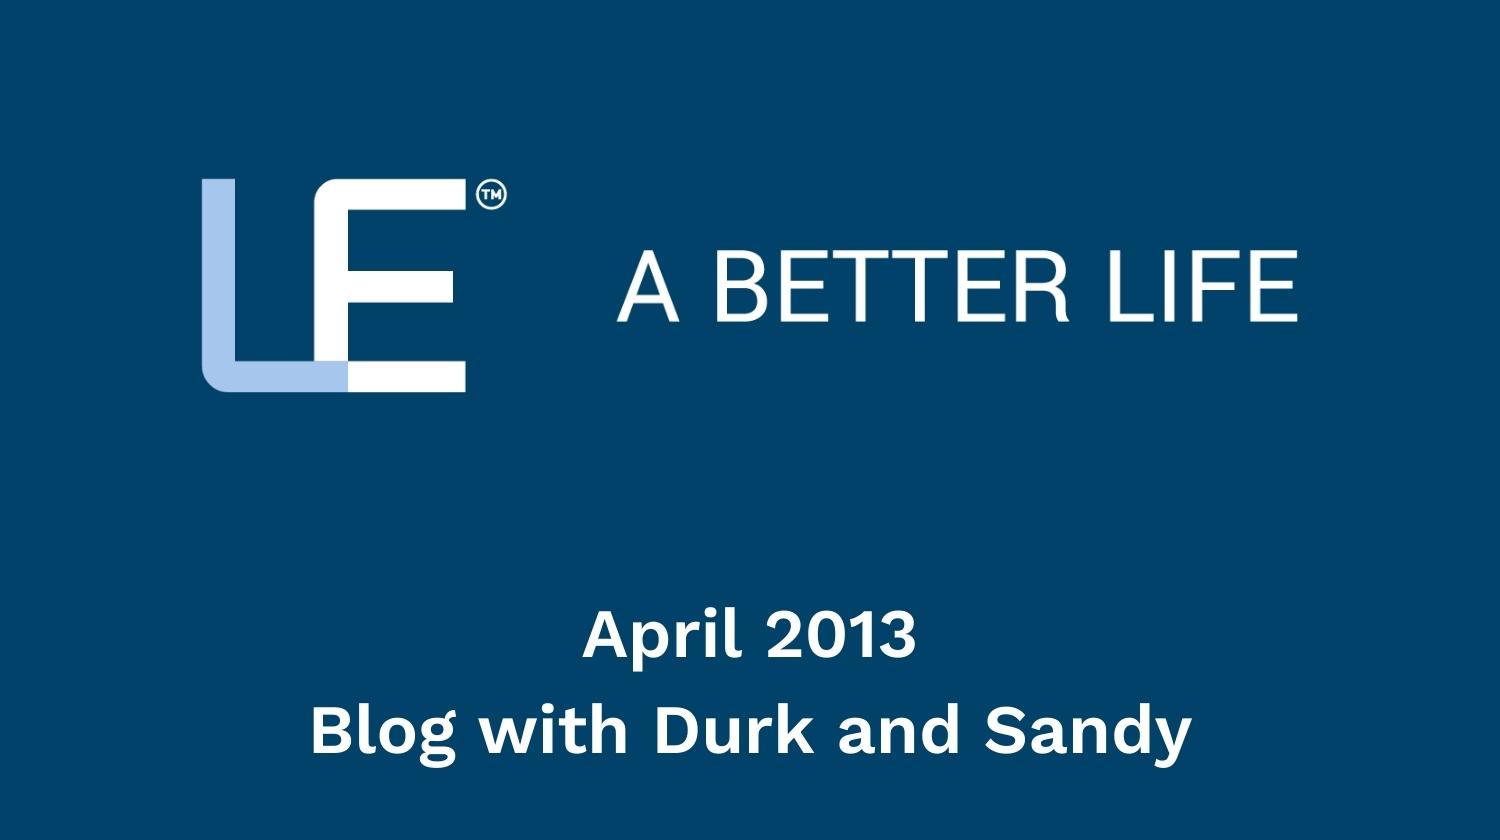 April 2013 Blog with Durk and Sandy